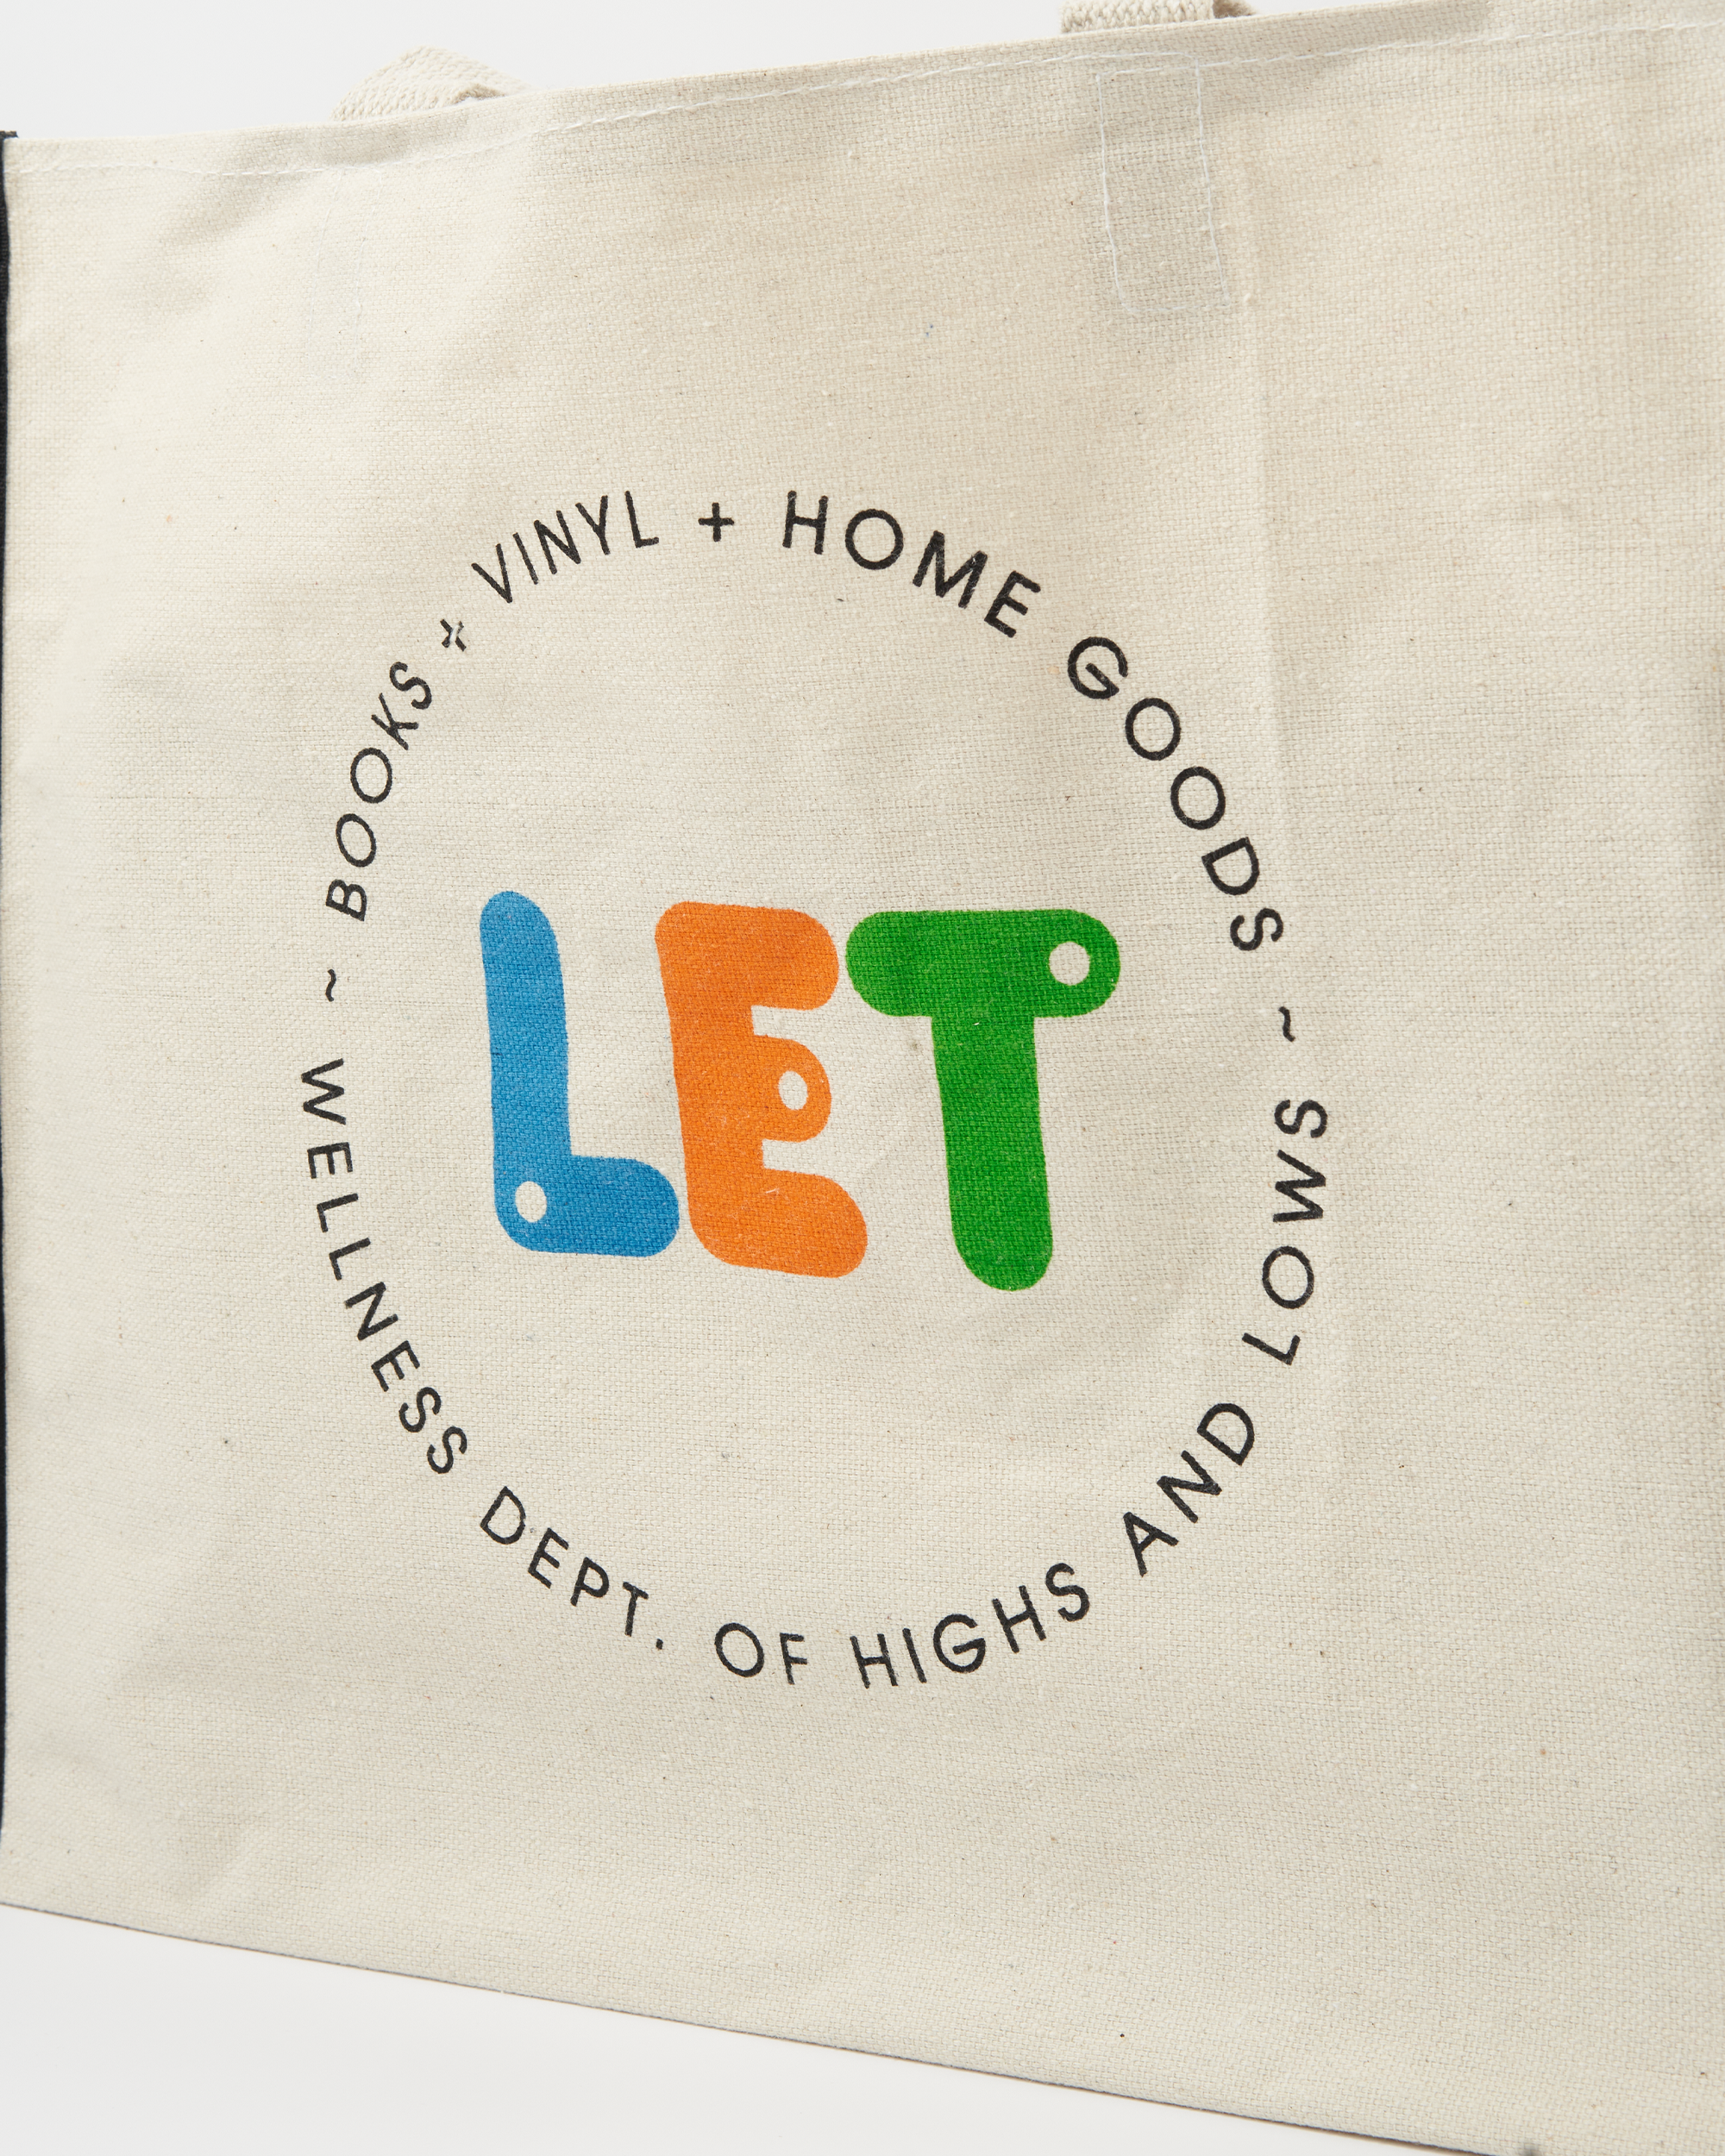 L.E.T Stamp Shopping Tote